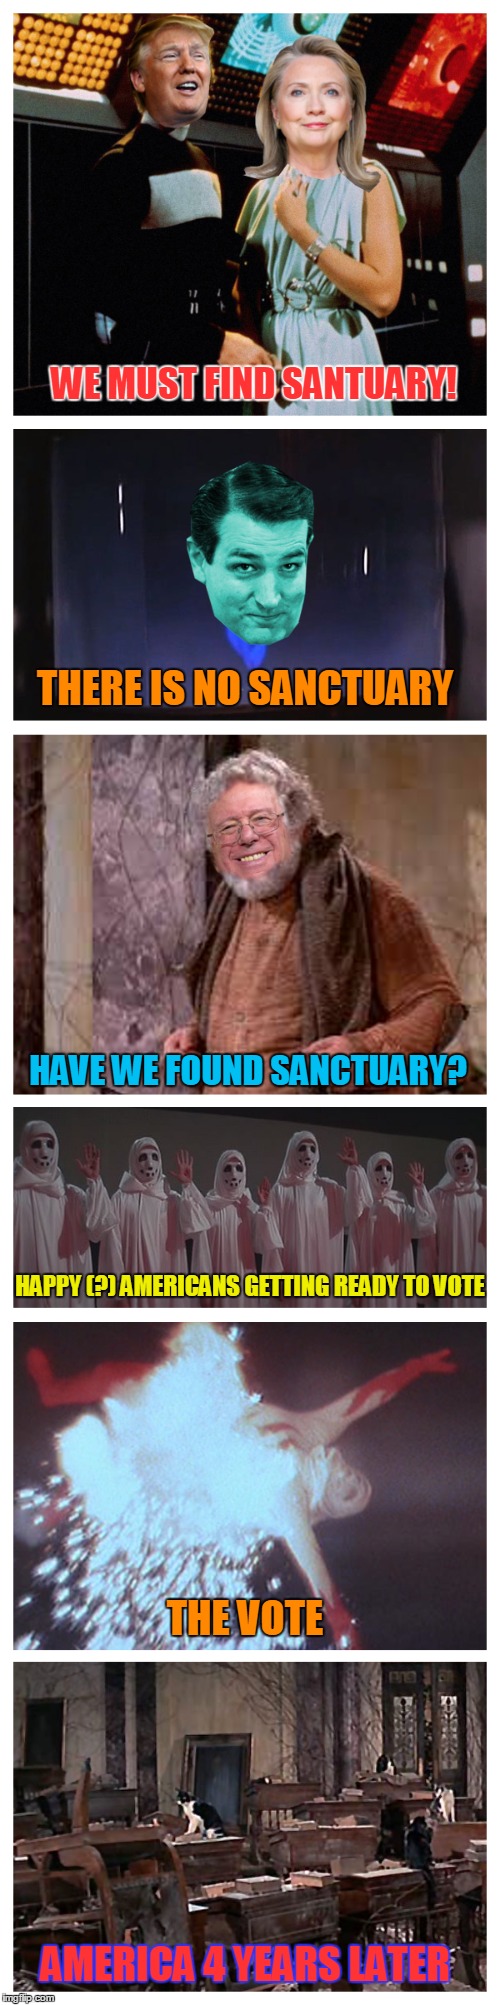 Logan's Election | WE MUST FIND SANTUARY! THERE IS NO SANCTUARY; HAVE WE FOUND SANCTUARY? HAPPY (?) AMERICANS GETTING READY TO VOTE; THE VOTE; AMERICA 4 YEARS LATER | image tagged in memes,logan's run,election 2016,i don't know anything about politics,so don't be offended | made w/ Imgflip meme maker